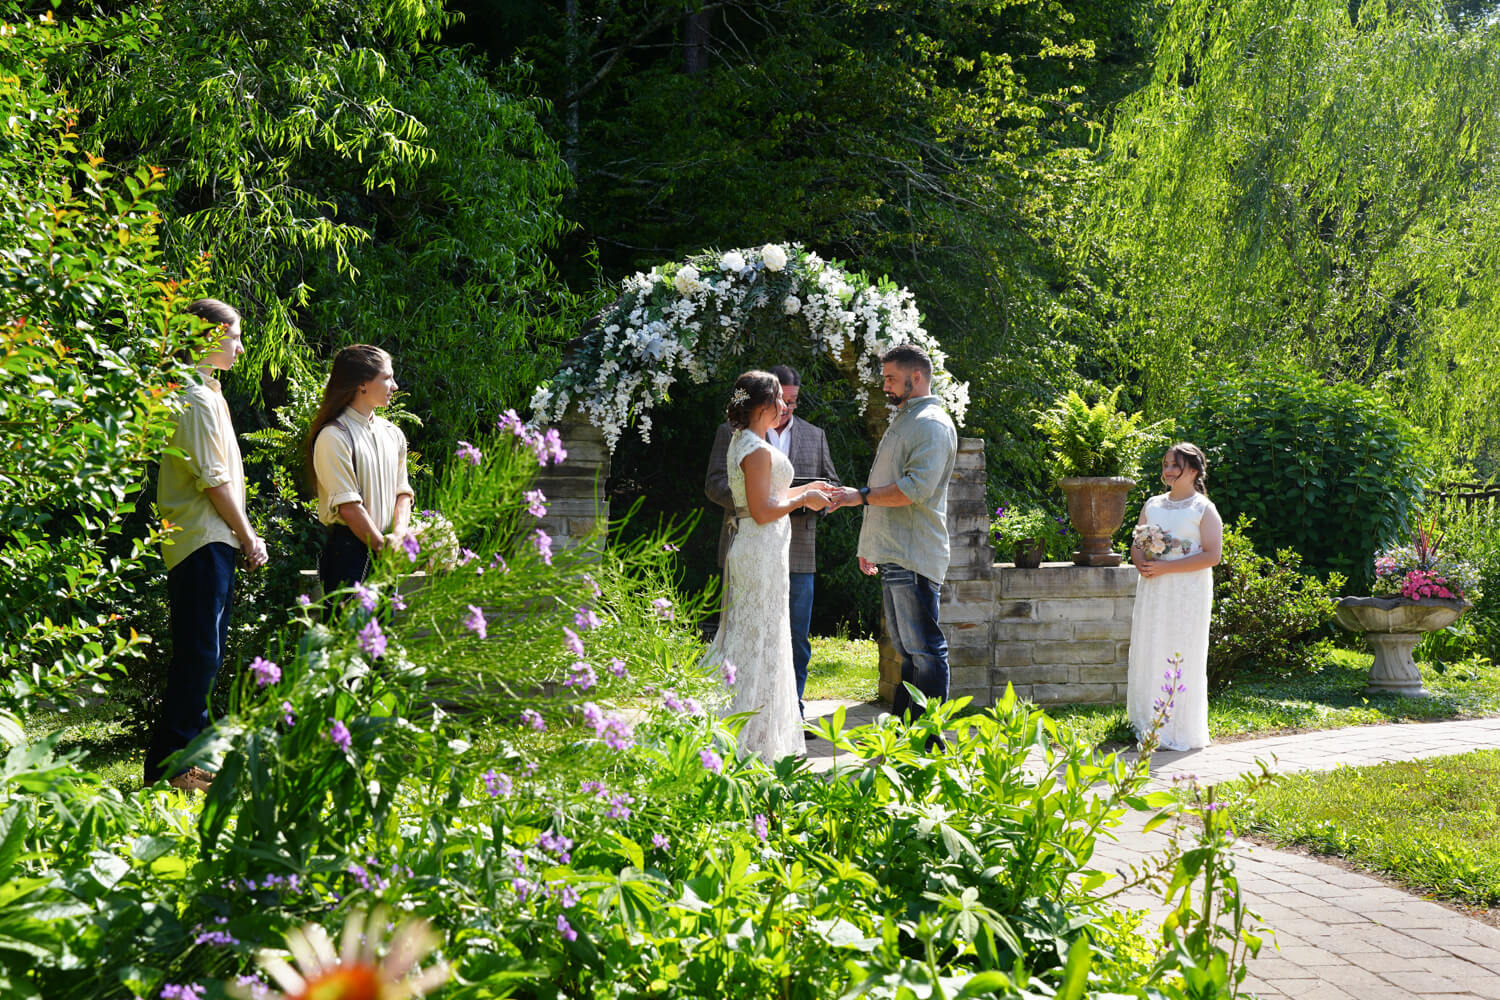 Micro wedding elopement ceremony at a stone arch with white flowers next to a garden with purple phlox and cone flowers at Honeysuckle Hills in Pigeon Forge